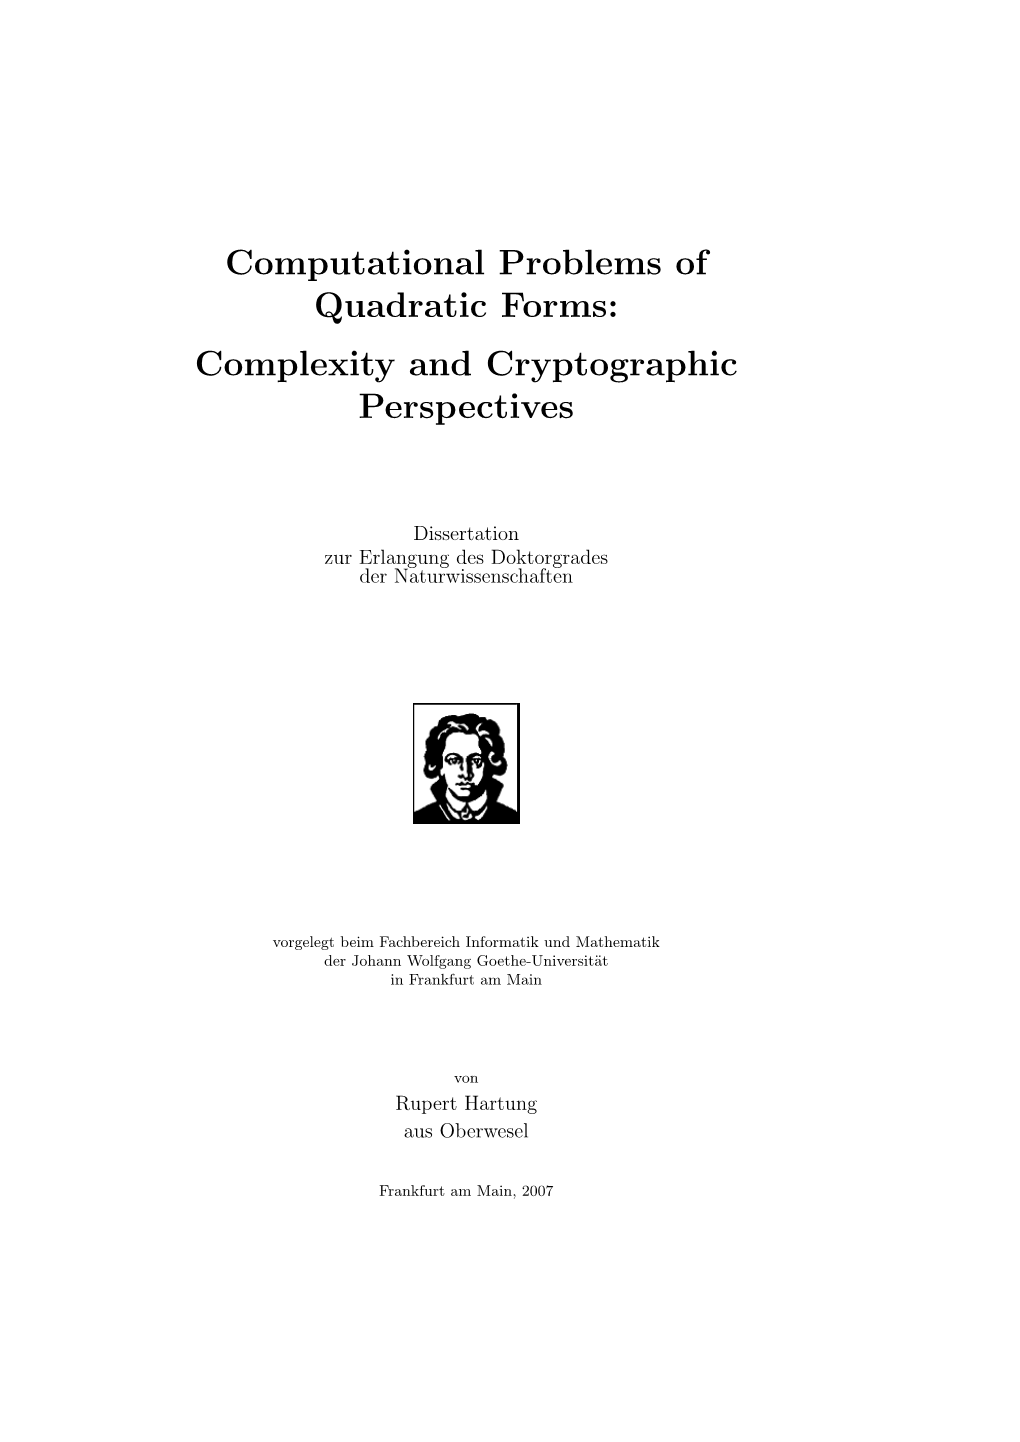 Computational Problems of Quadratic Forms: Complexity and Cryptographic Perspectives